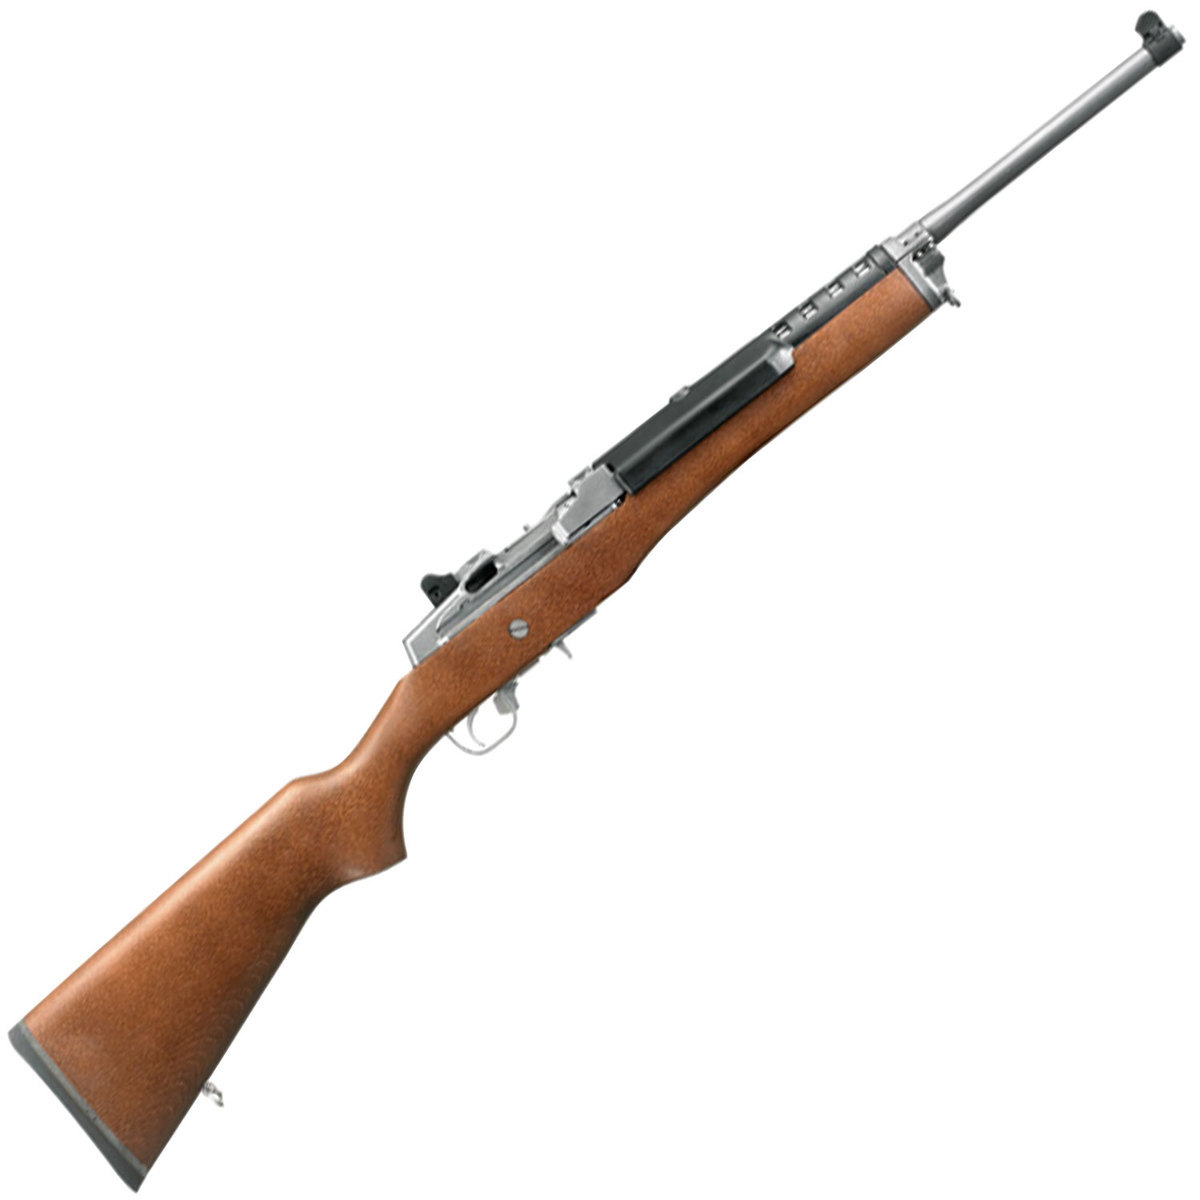 ruger-mini-14-ranch-stainlesswood-semi-automatic-rifle-556mm-nato-1116519-1.jpg